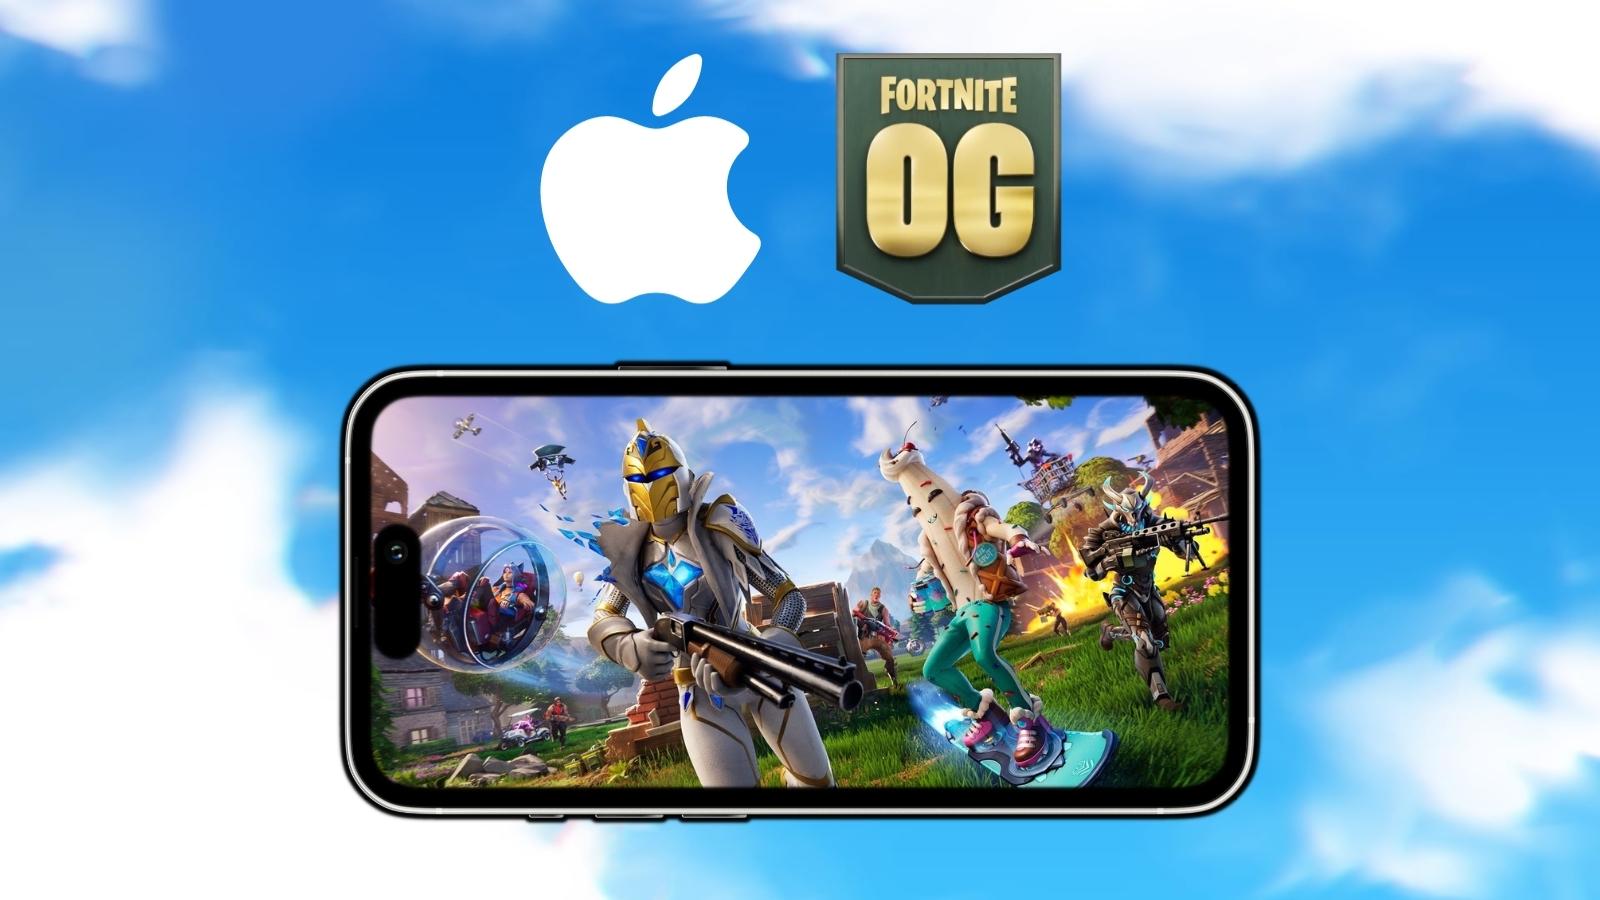 How to download Fortnite on iPhone & other Apple devices via xCloud